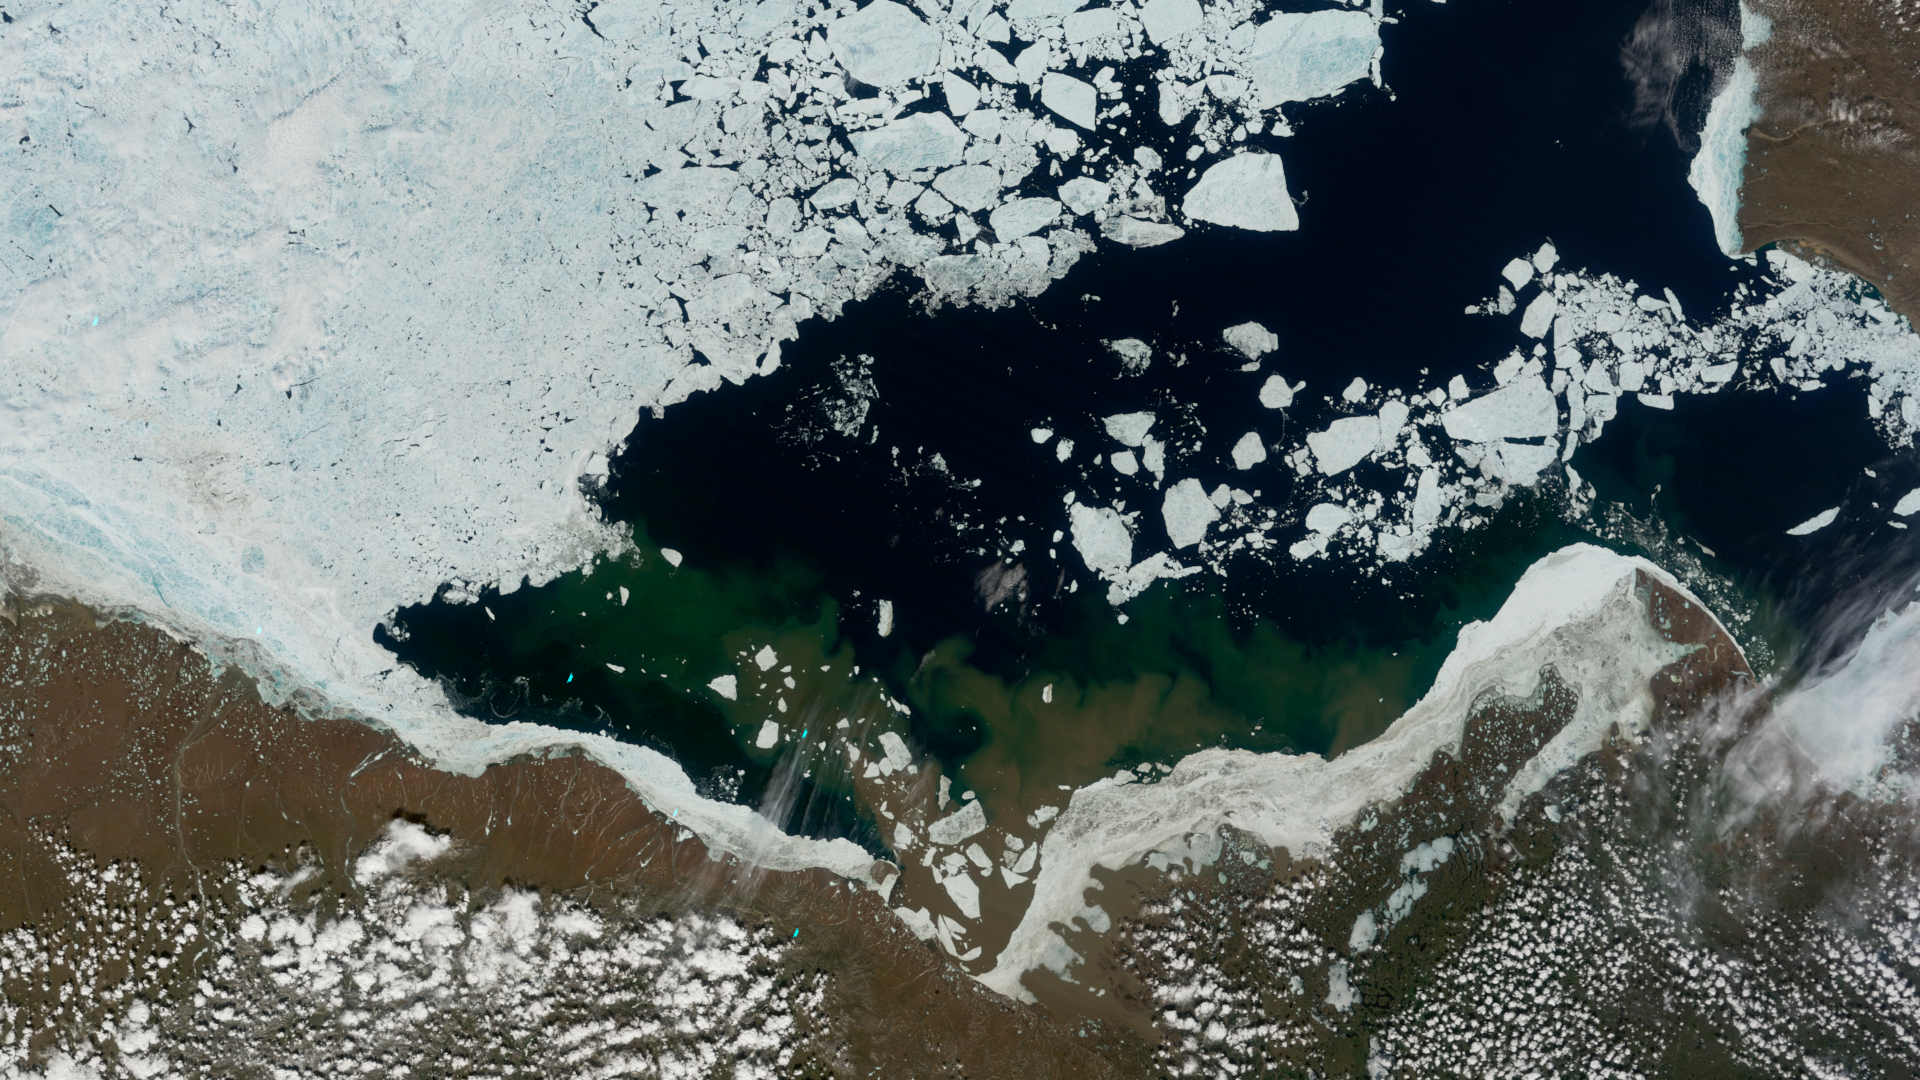 Rapidly retreating sea ice in the Beaufort Sea is shown in 2012. Recently, researchers discovered massive swaths of thawing submarine permafrost in this region of Arctic waters.